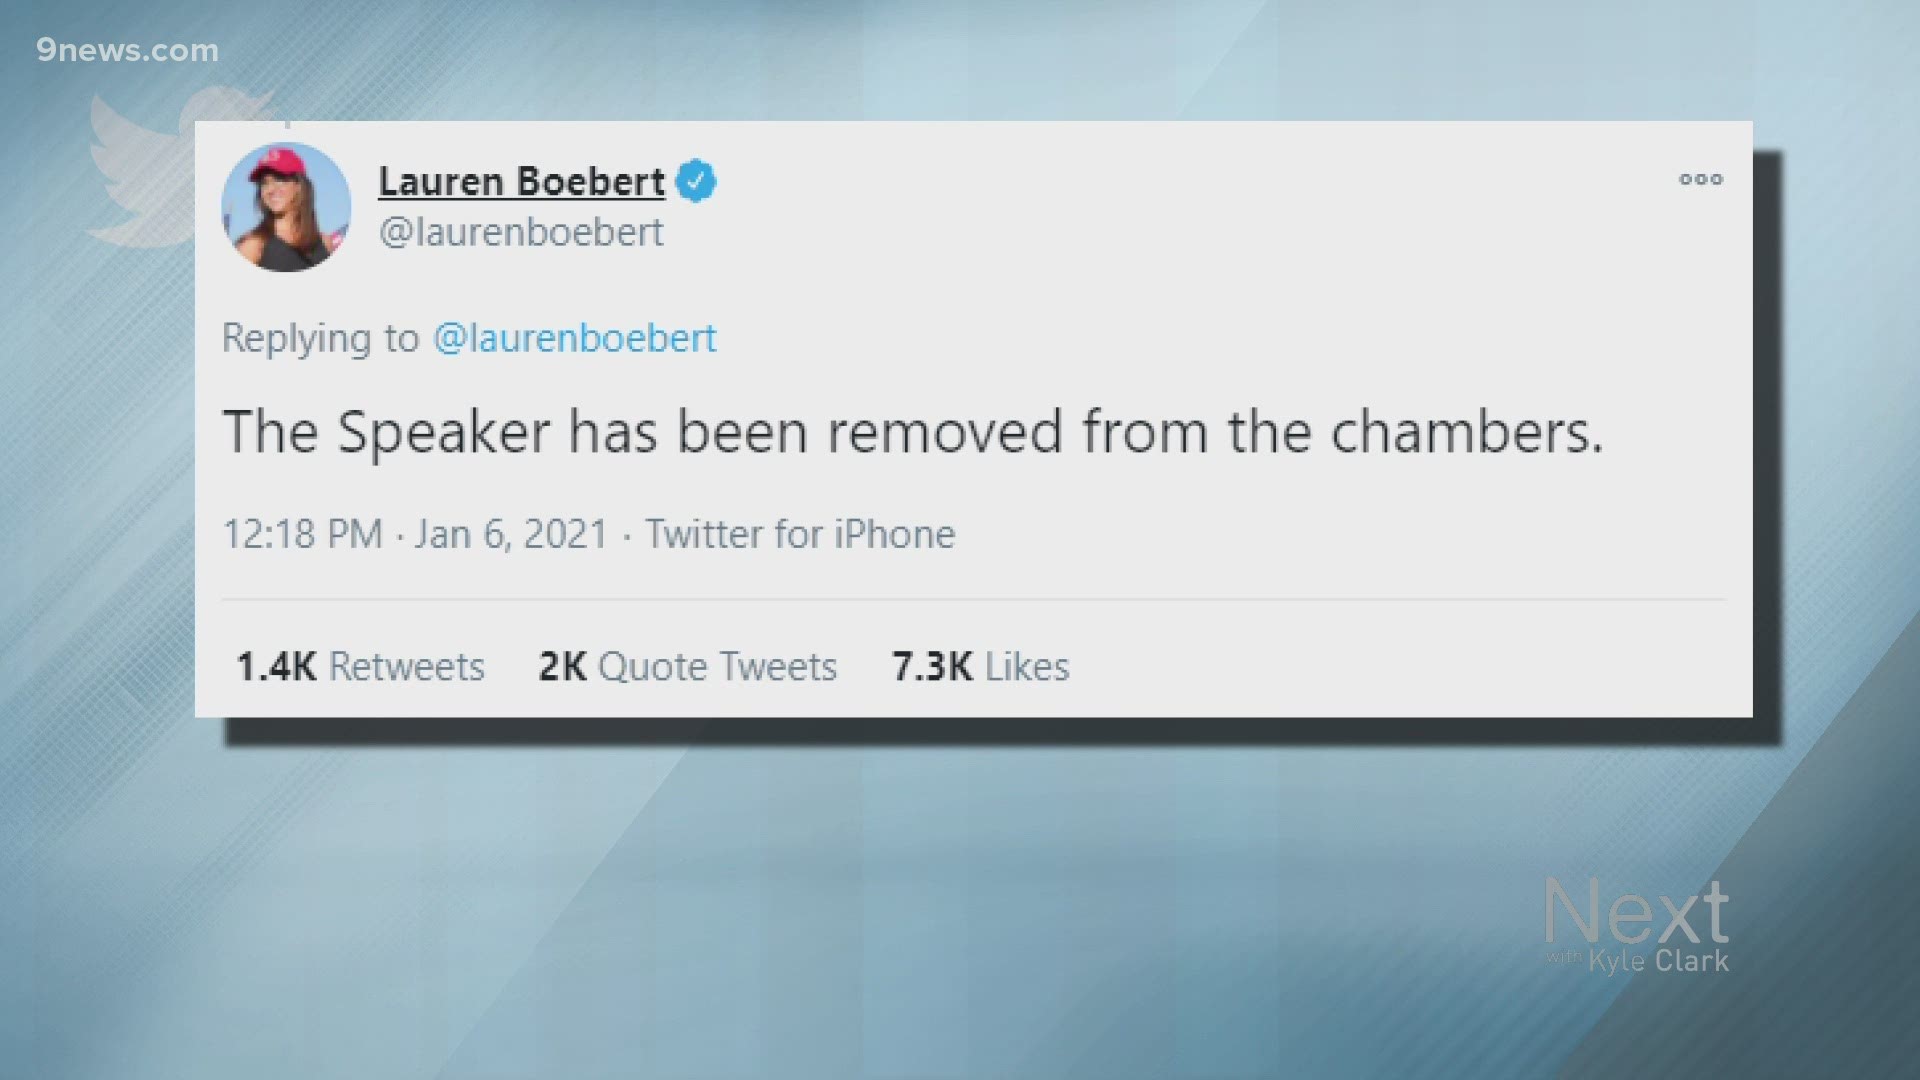 Colorado Congresswoman Lauren Boebert went viral on social media with calls for her resignation based on her tweets during the failed insurrection.